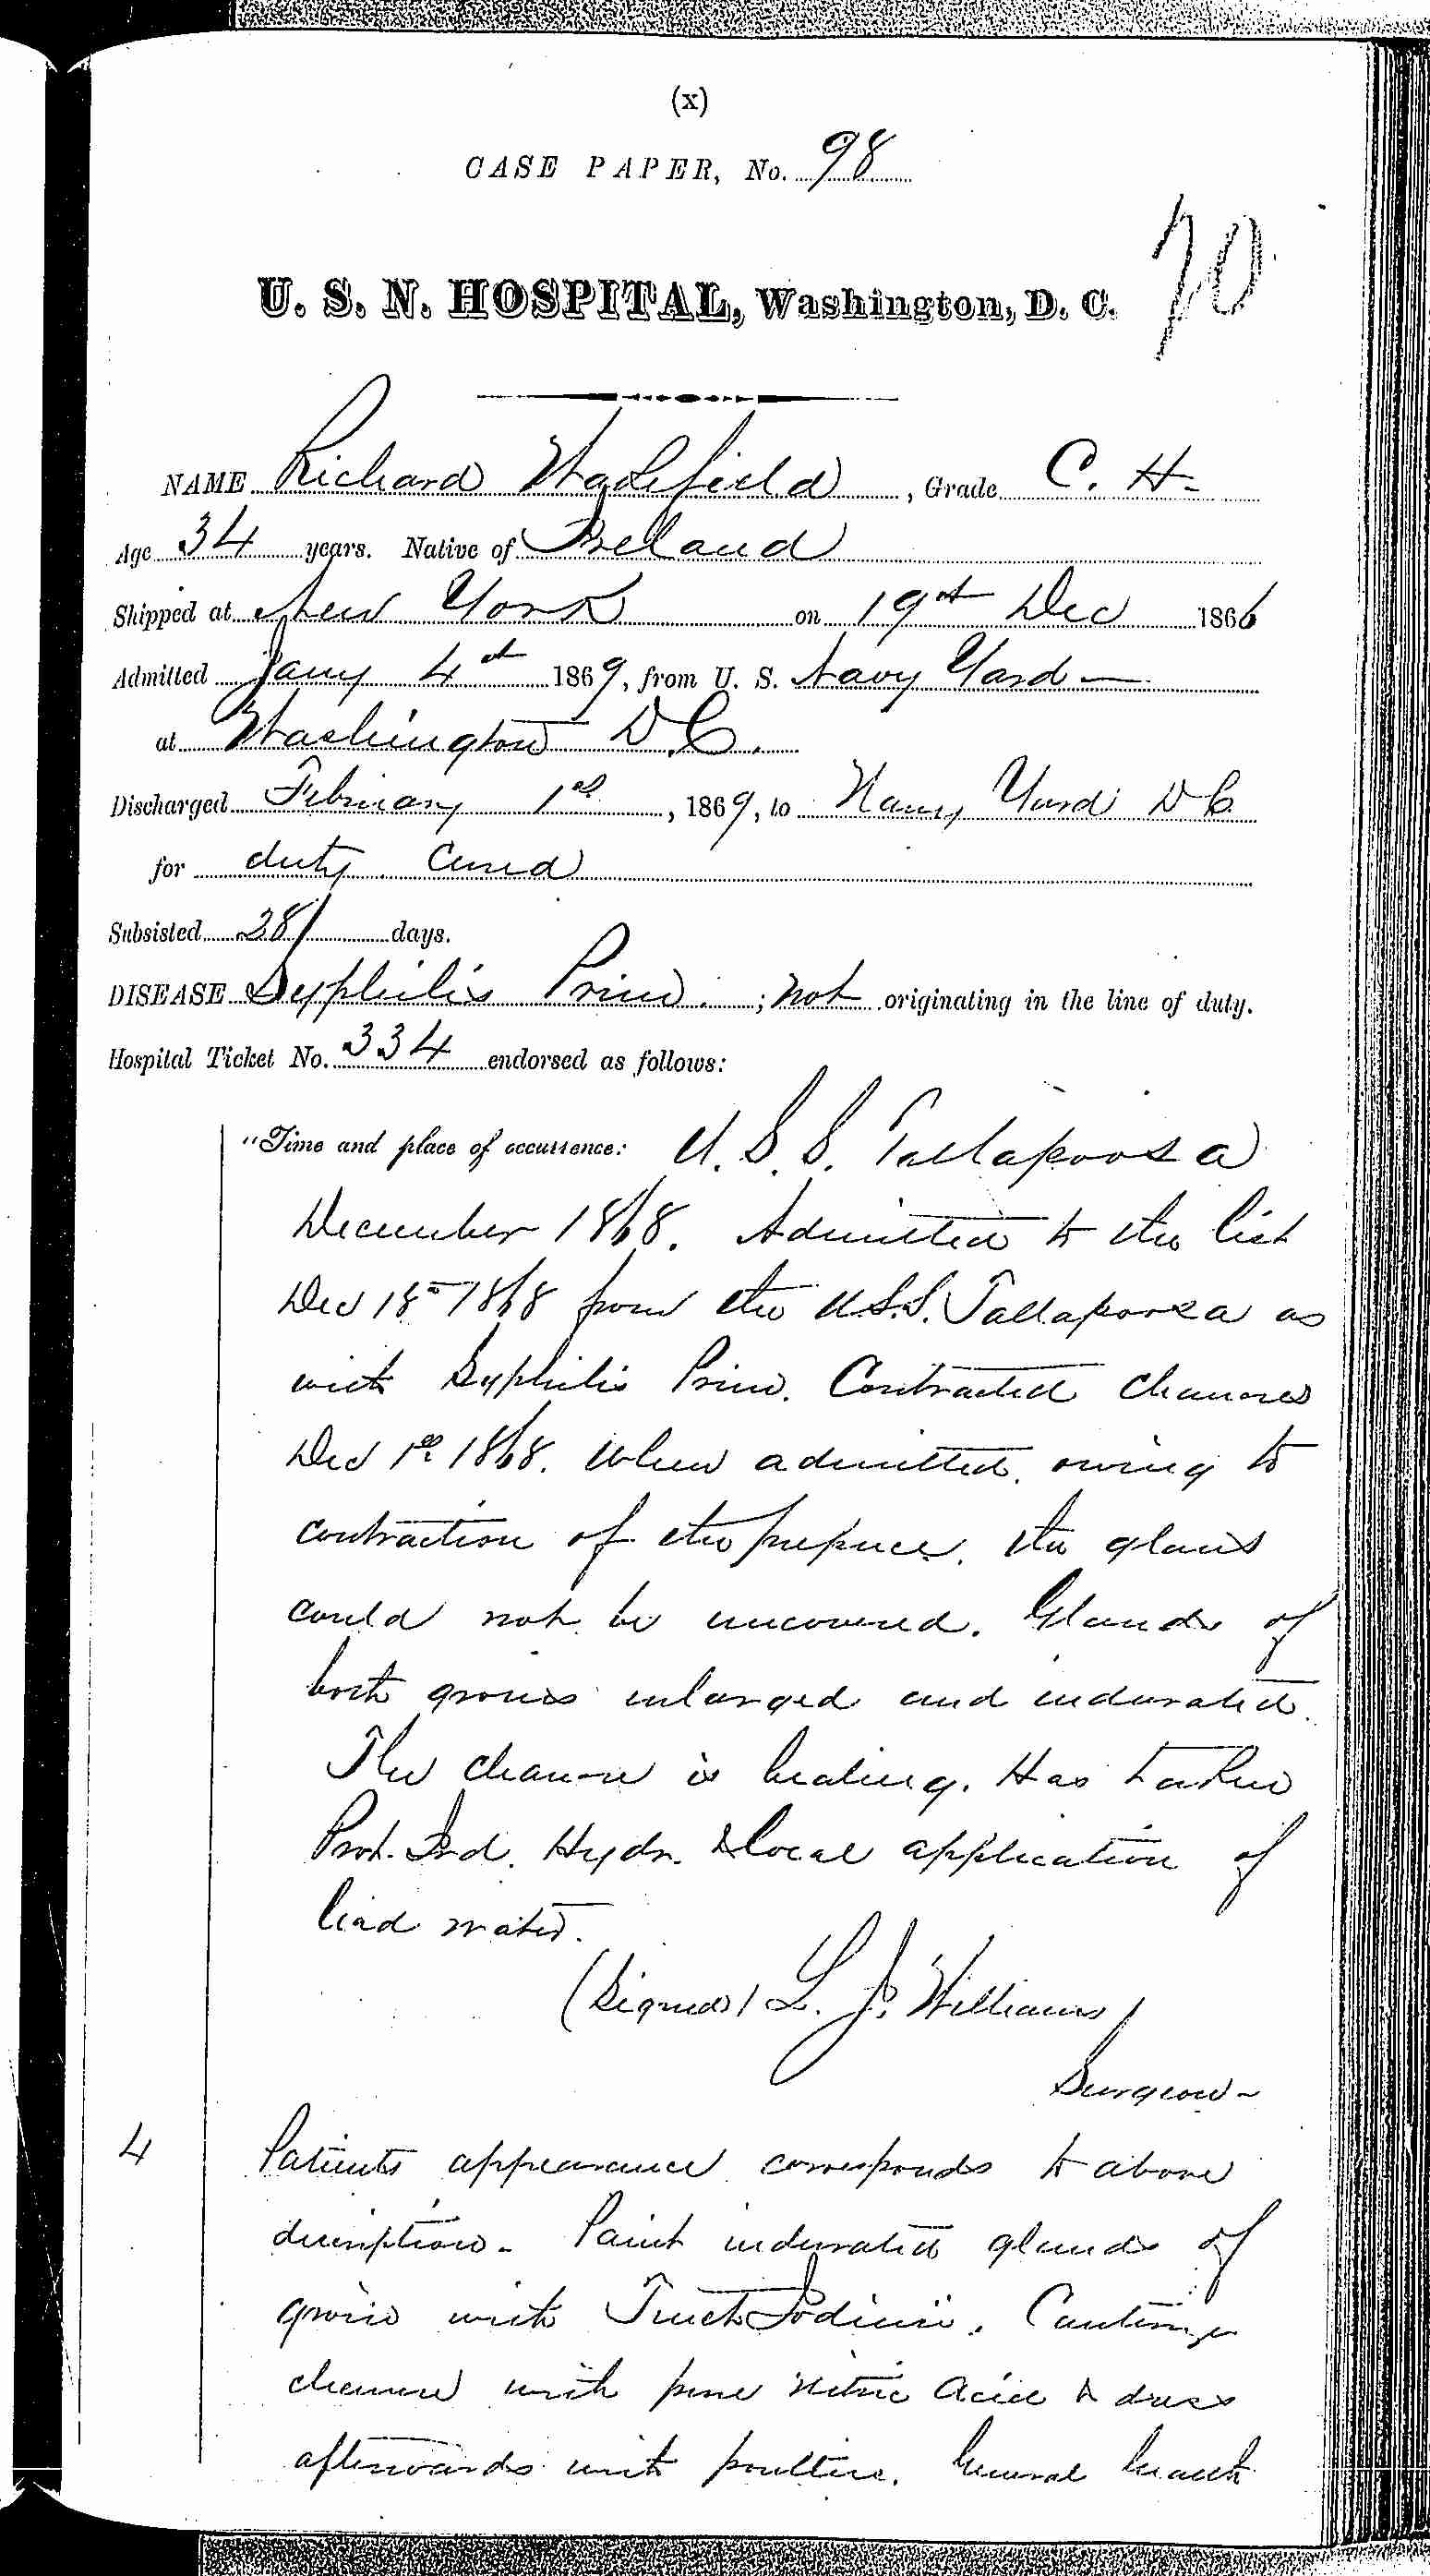 Entry for Richard Wakefield (page 1 of 3) in the log Hospital Tickets and Case Papers - Naval Hospital - Washington, D.C. - 1868-69